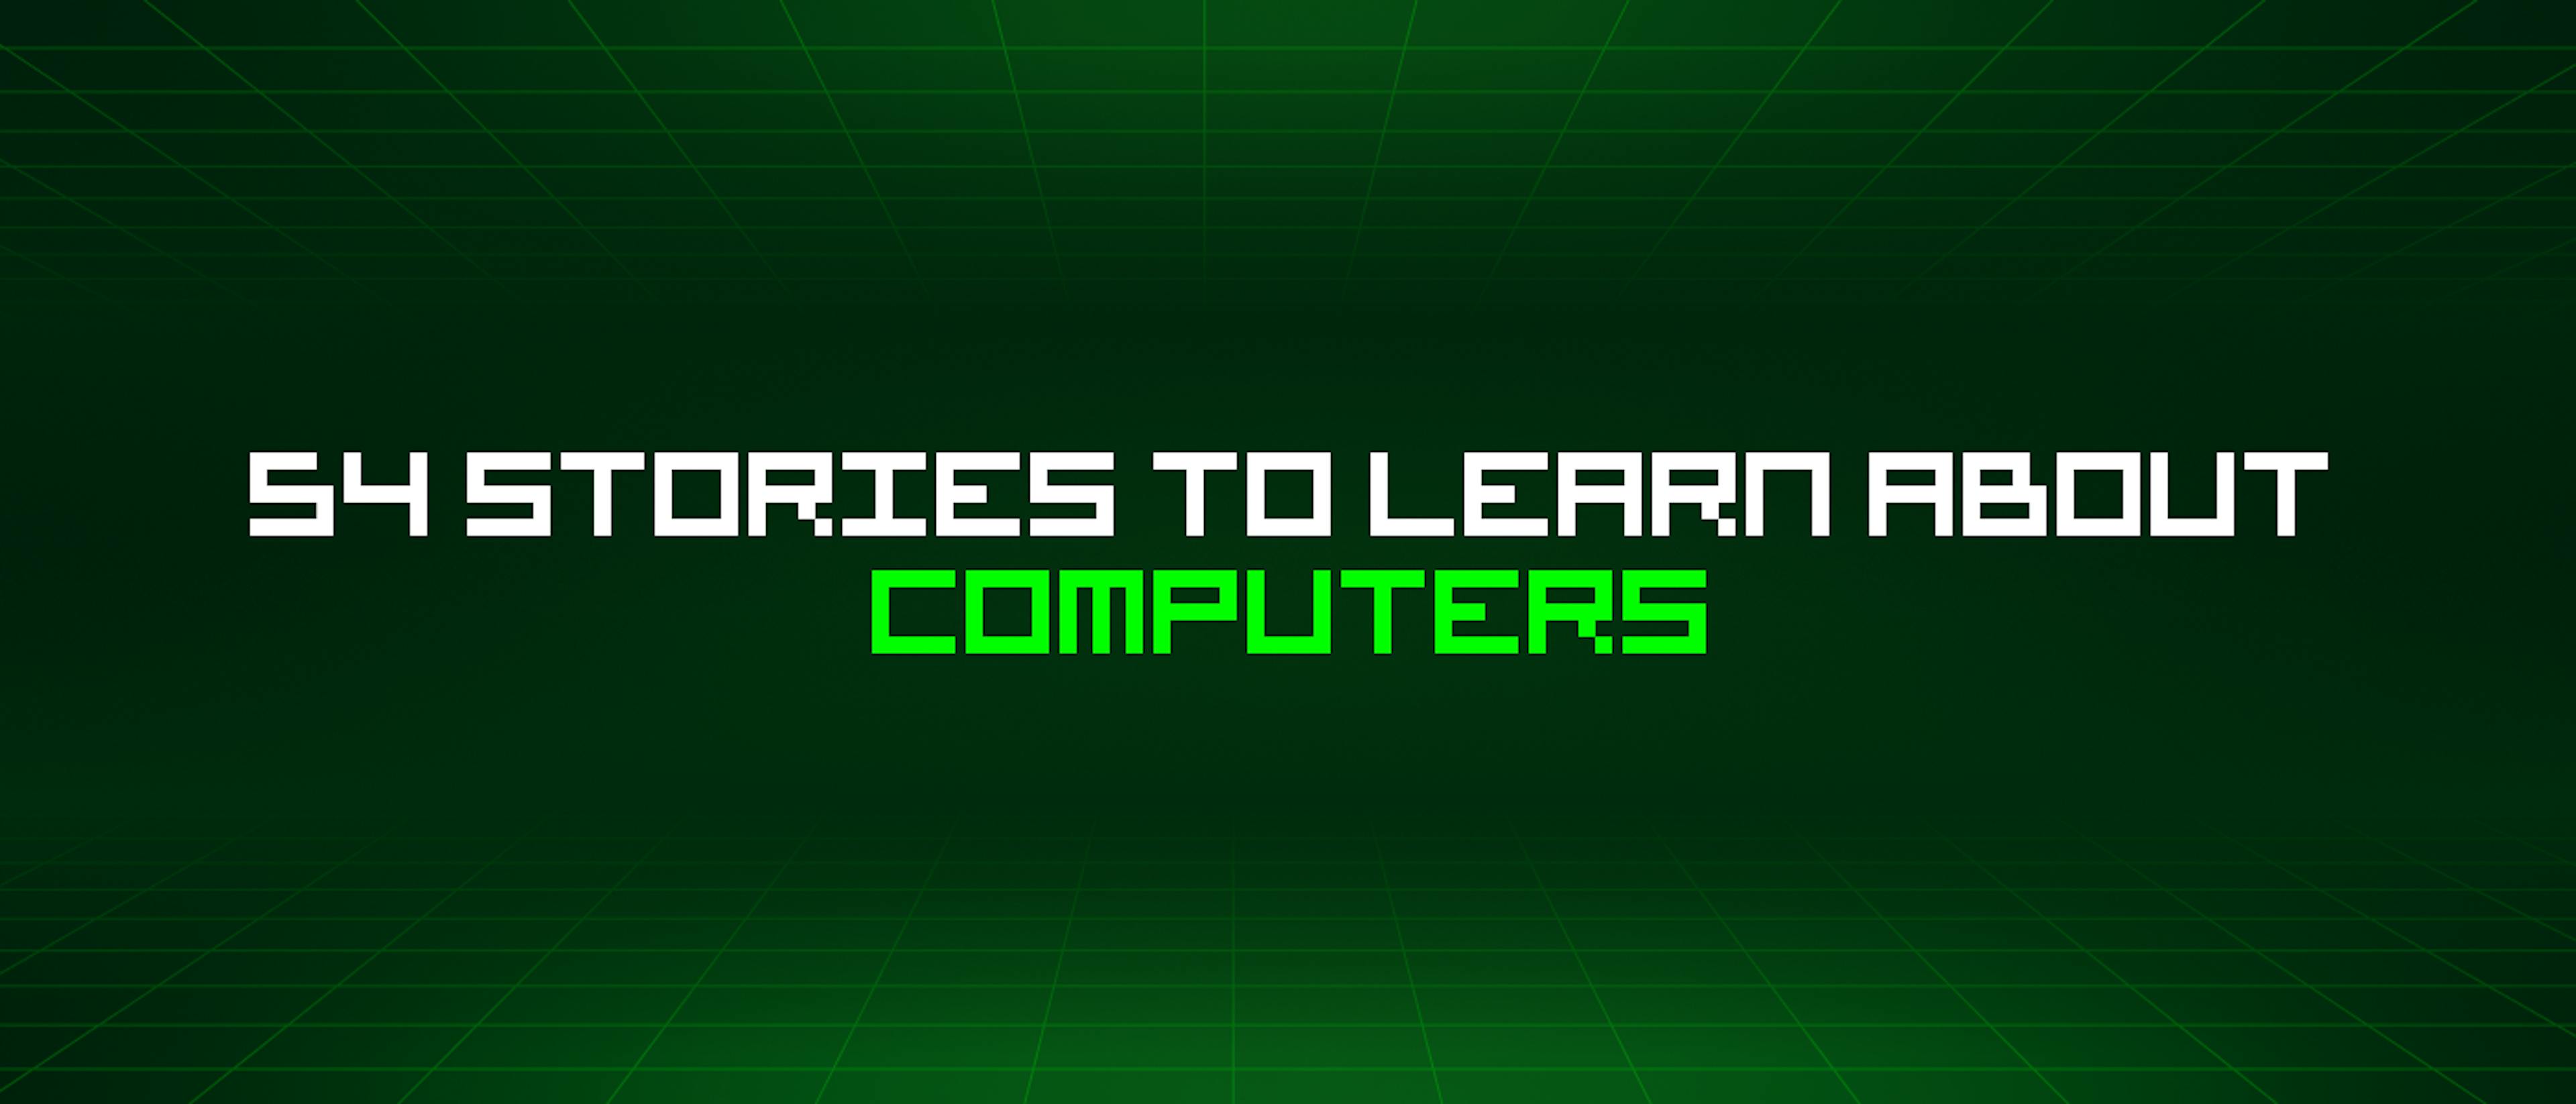 featured image - 54 Stories To Learn About Computers